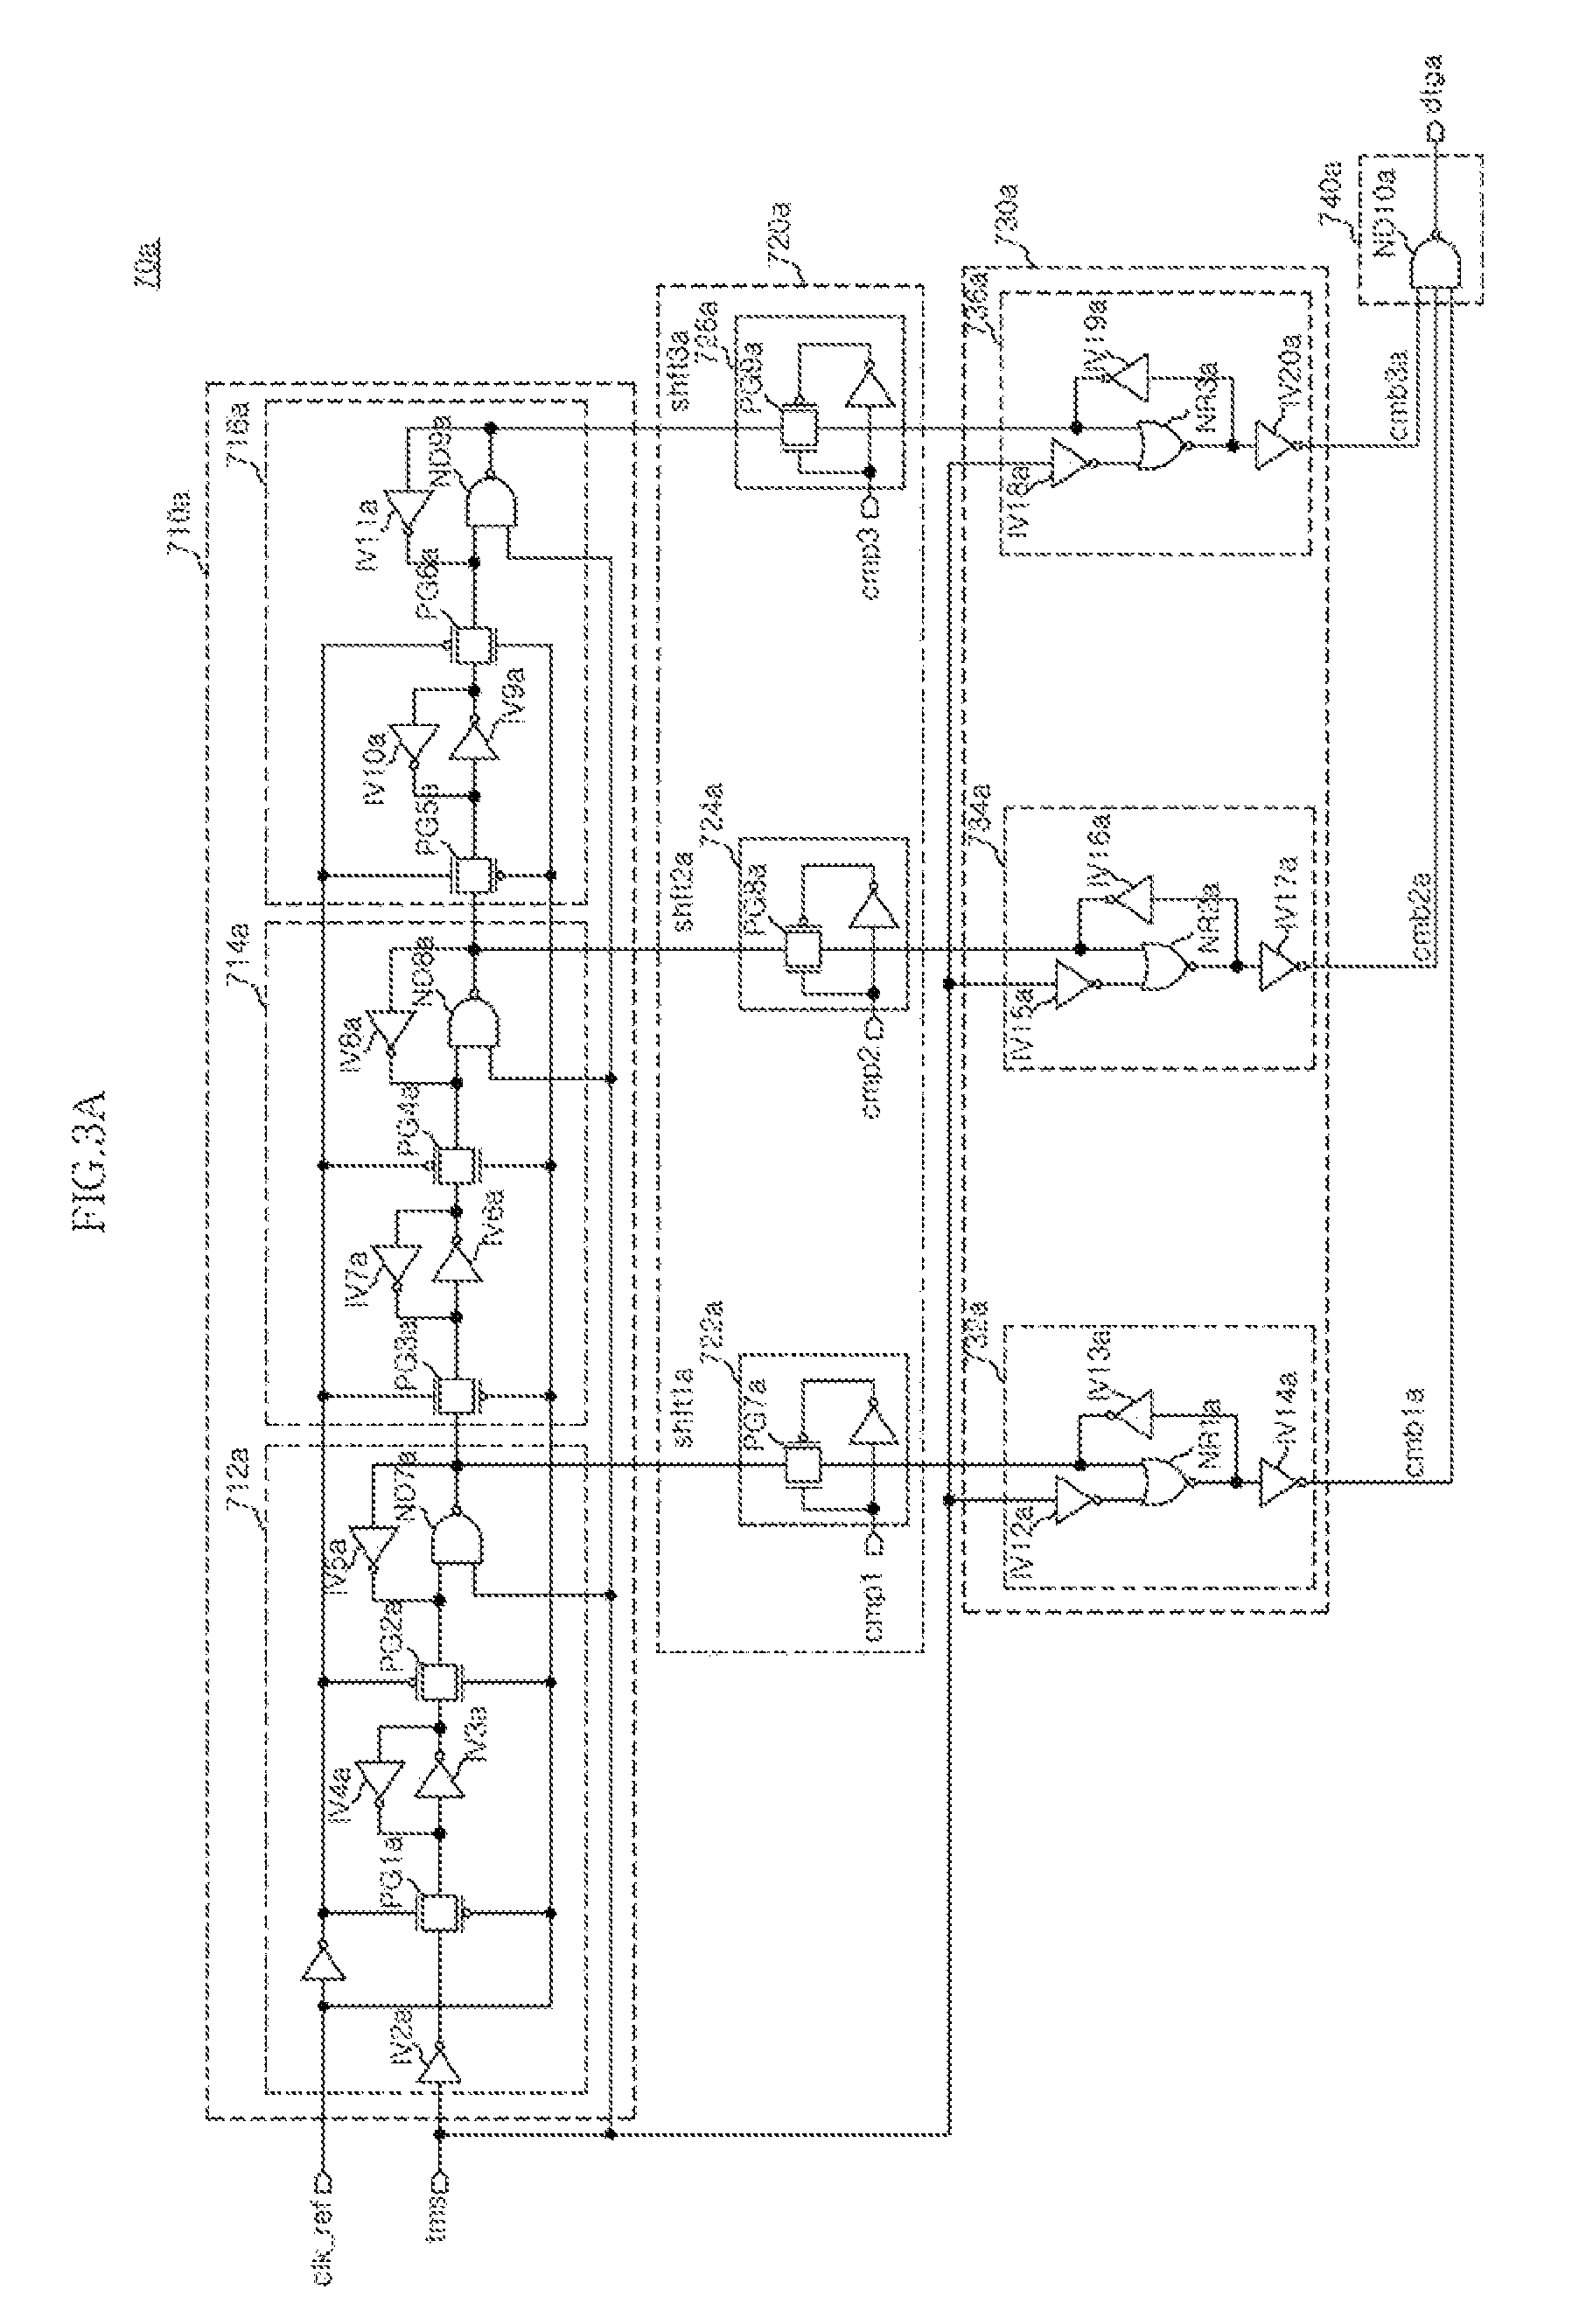 Clock test apparatus and method for semiconductor integrated circuit